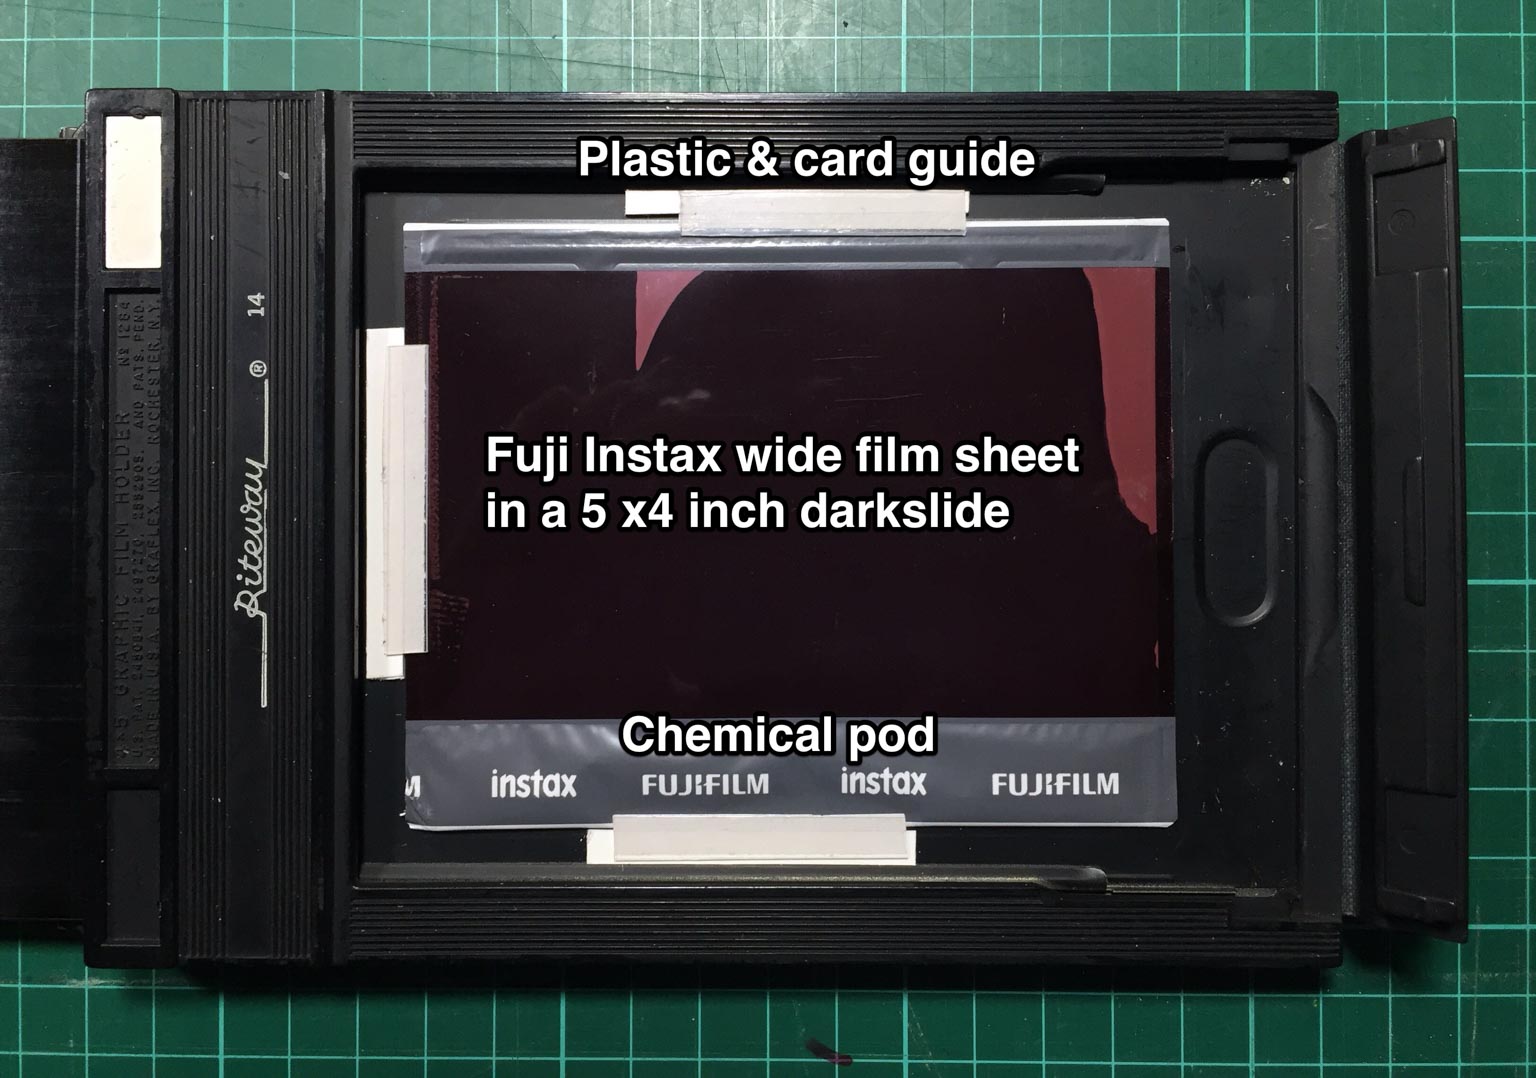 5 x 4 film holder loaded with Instax Wide film